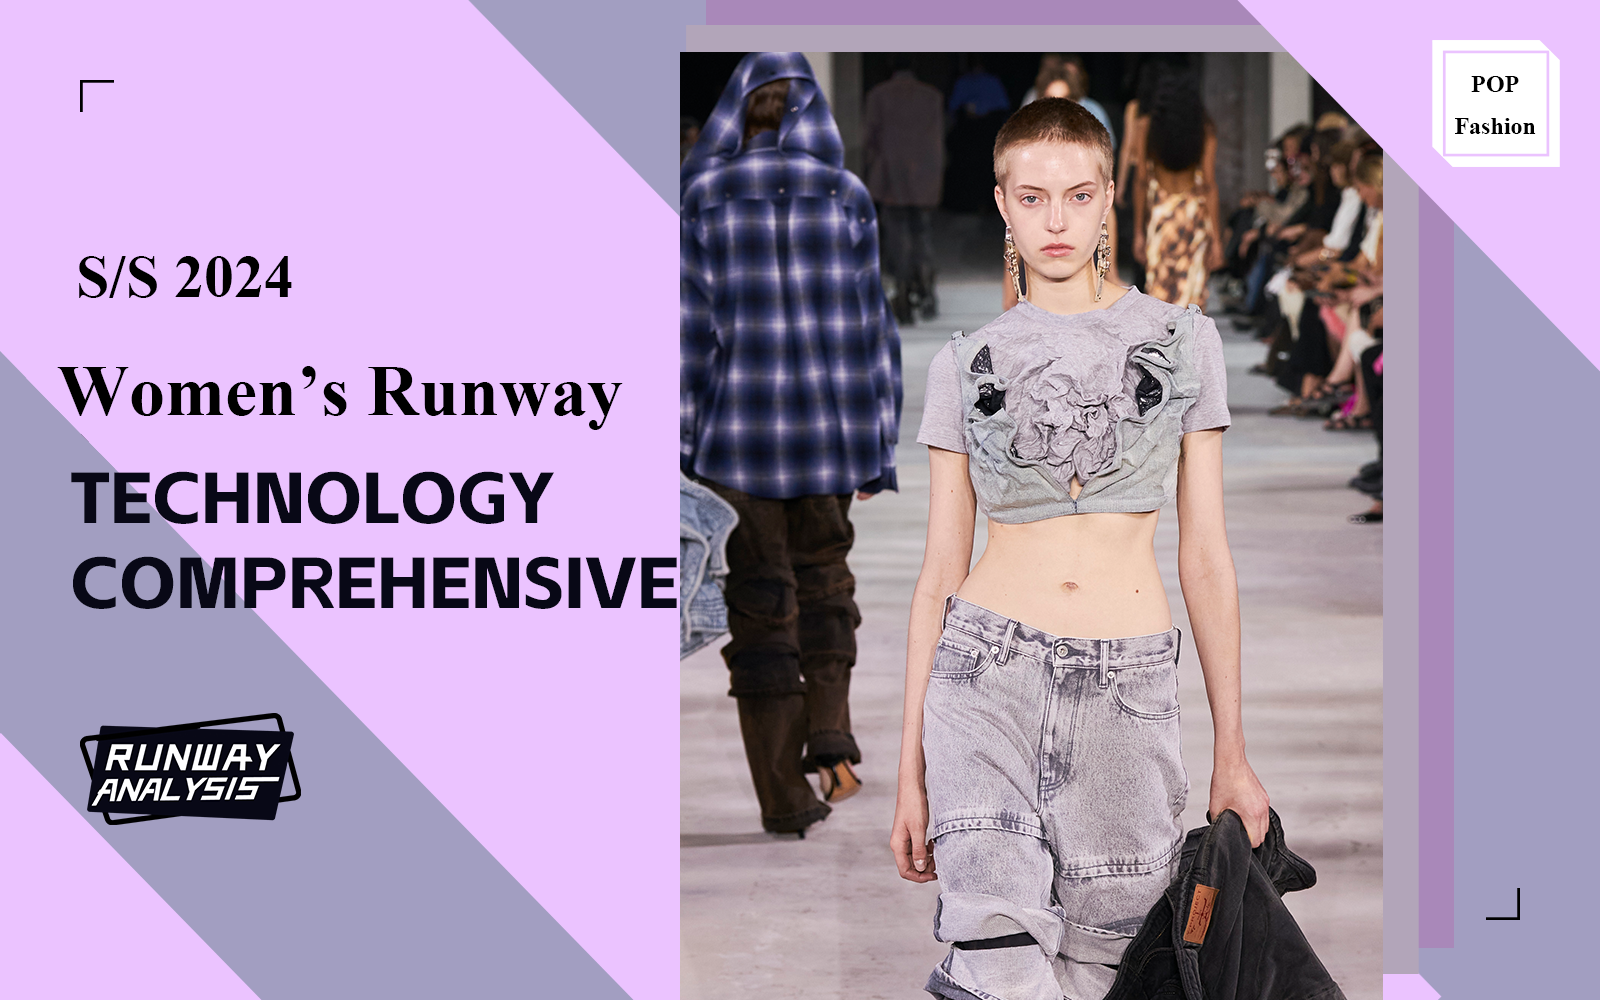 S/S 2024 Comprehensive Analysis of Women's Ready-to-wear Runway(Part One)